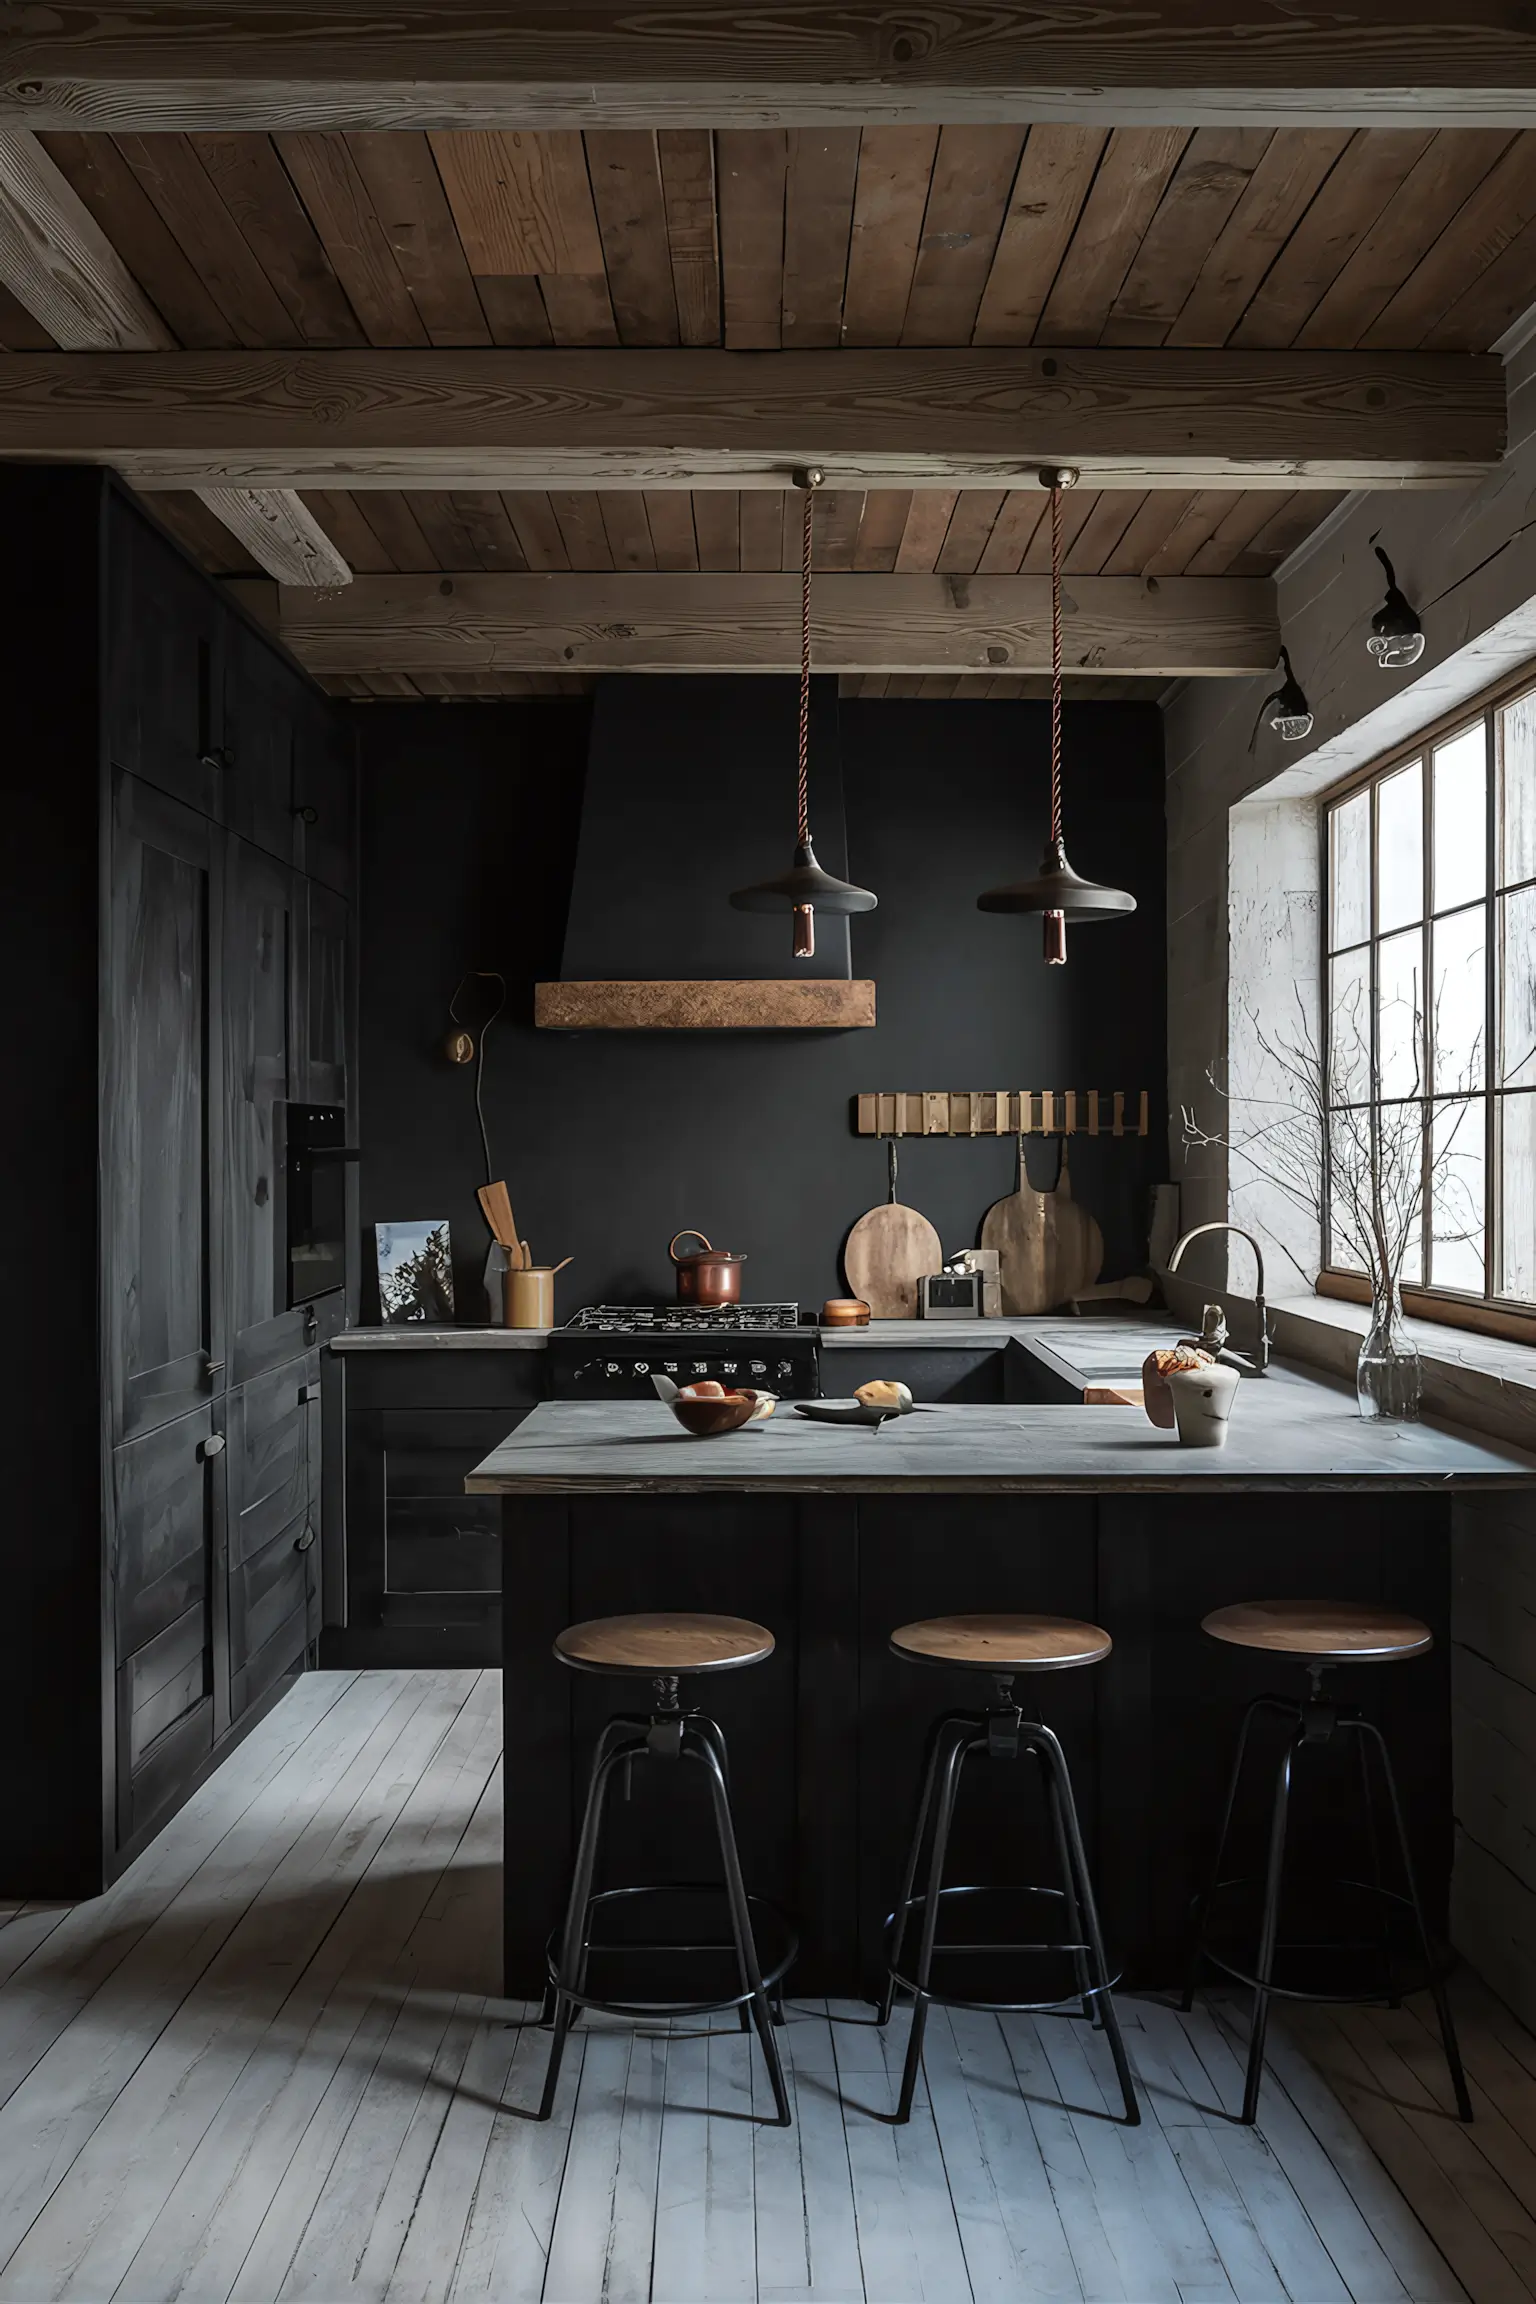 Rustic black kitchen with wooden beams and vintage fixtures.